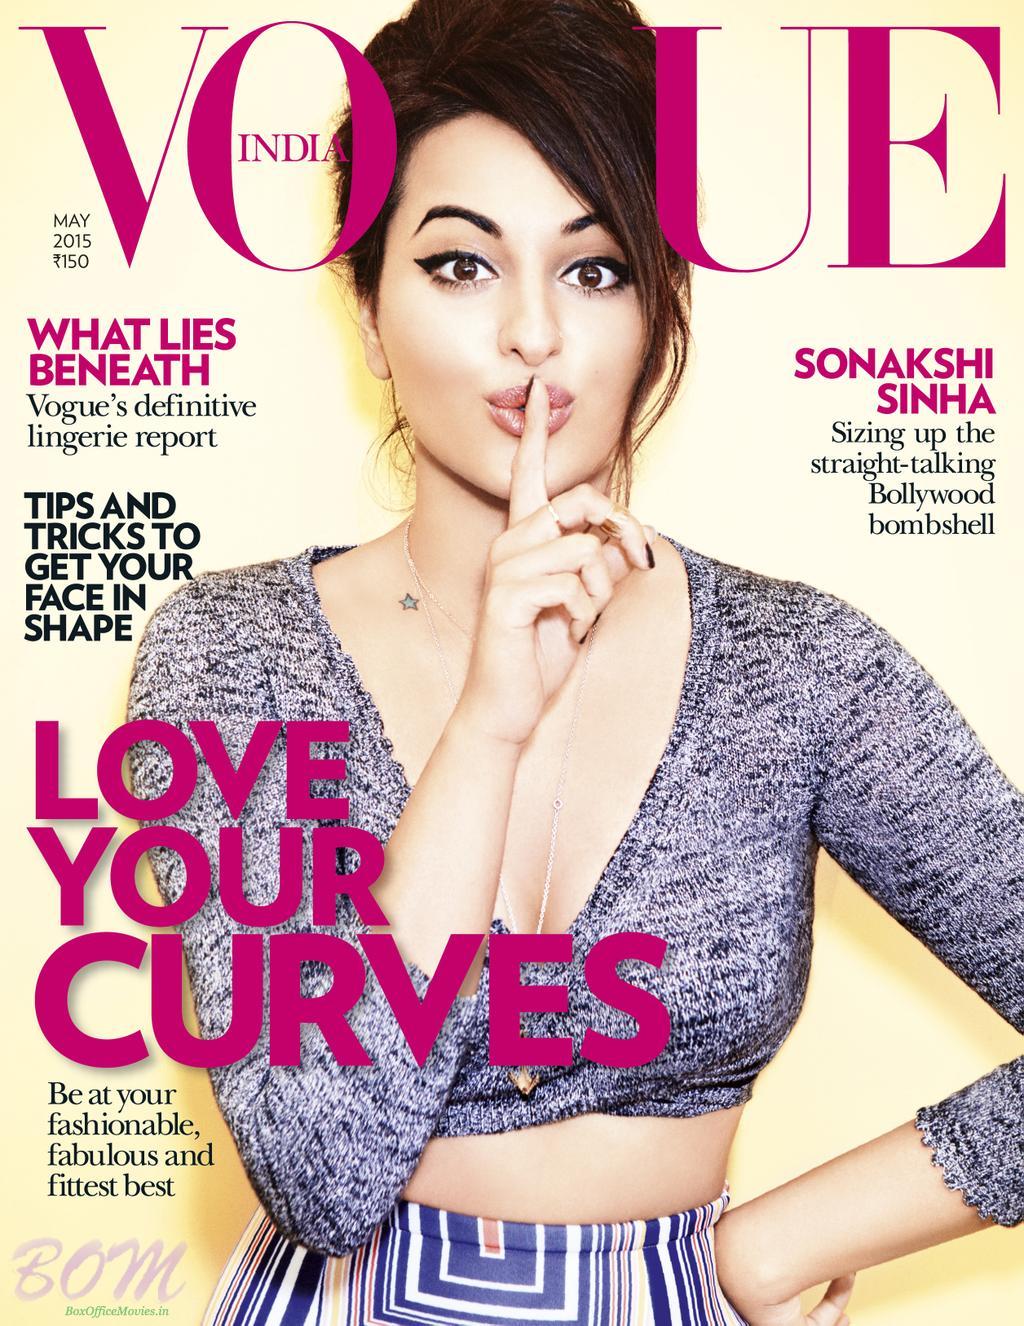 Bollywood Cover Girl Sonakshi Sinha on Vogue India Magazine May 2015 Issue